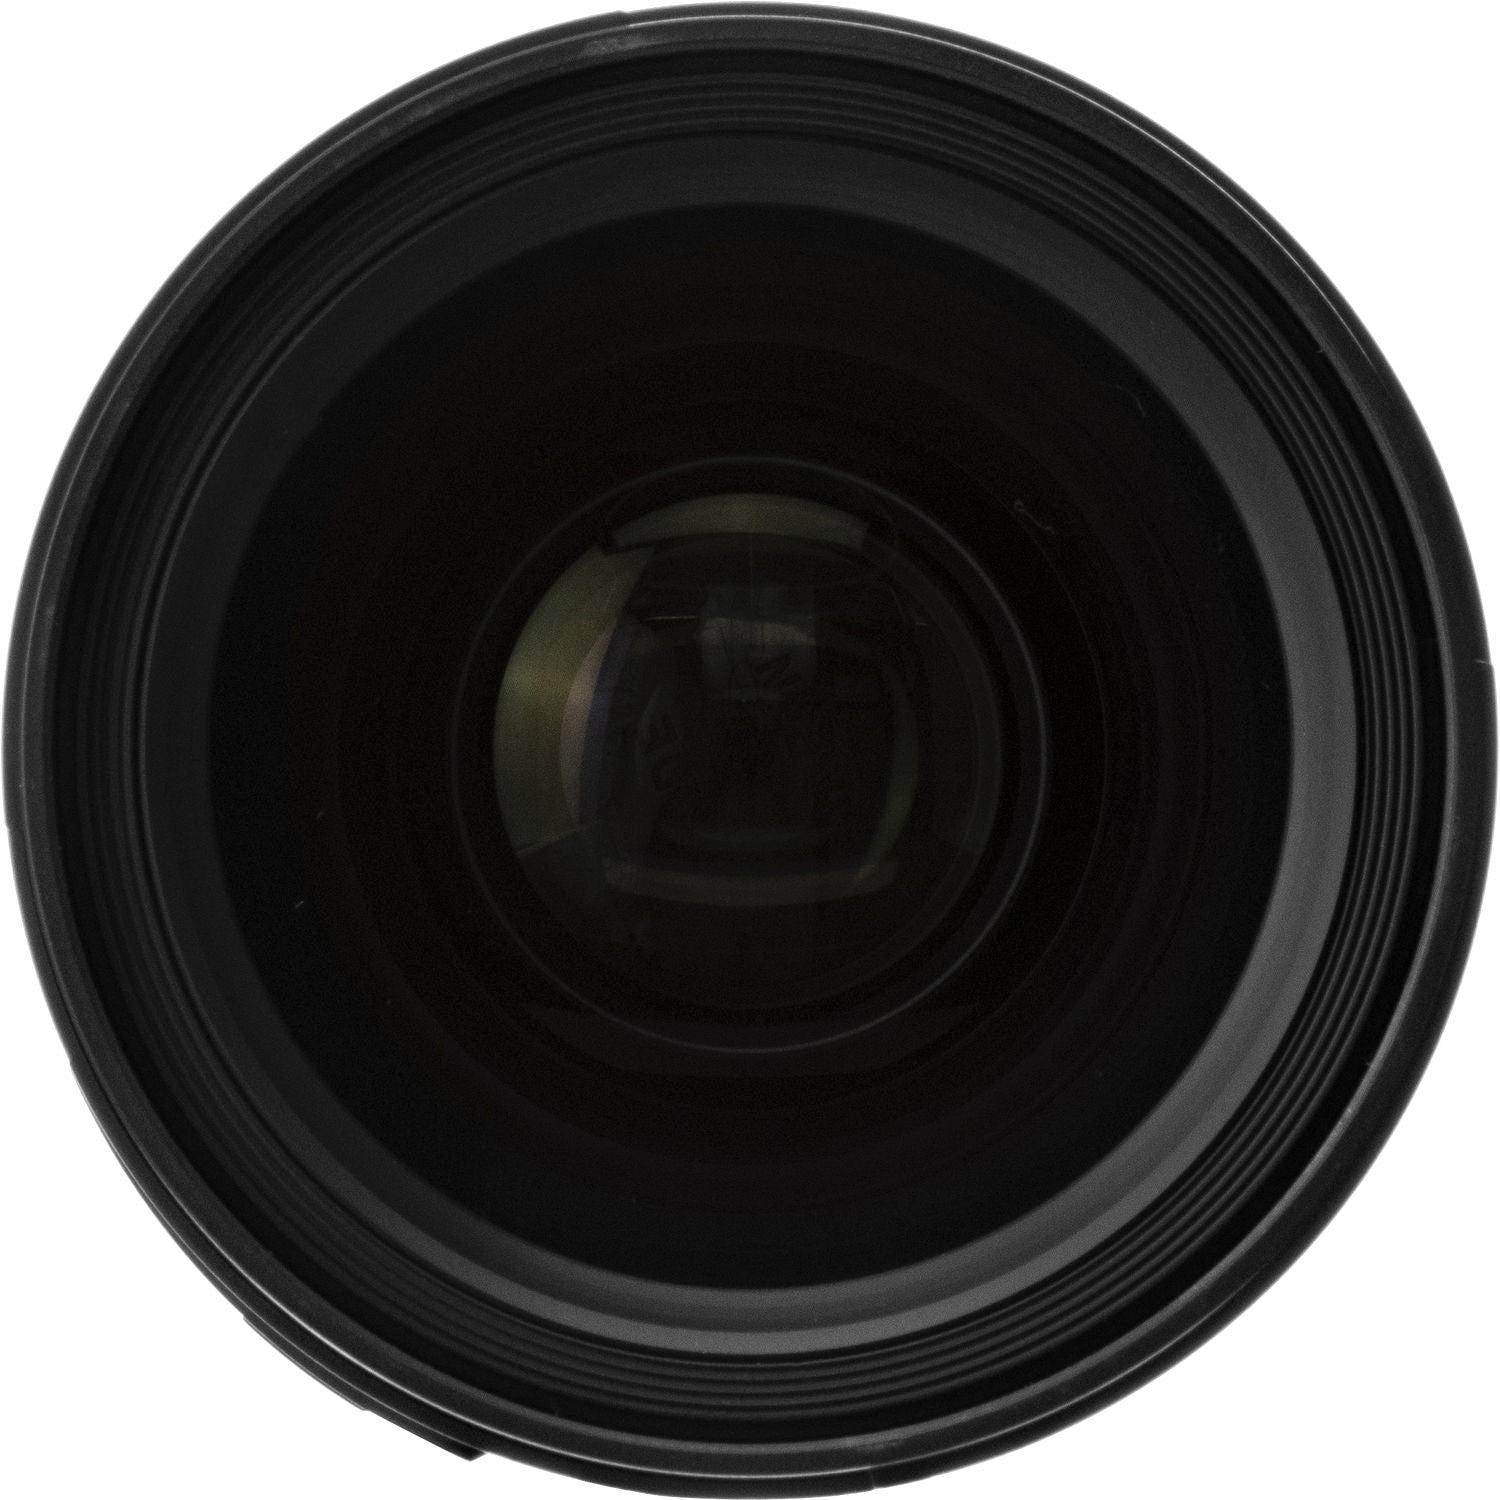 Sigma 40mm F1.4 DG HSM Art Lens for Leica L in a Front Close-Up View